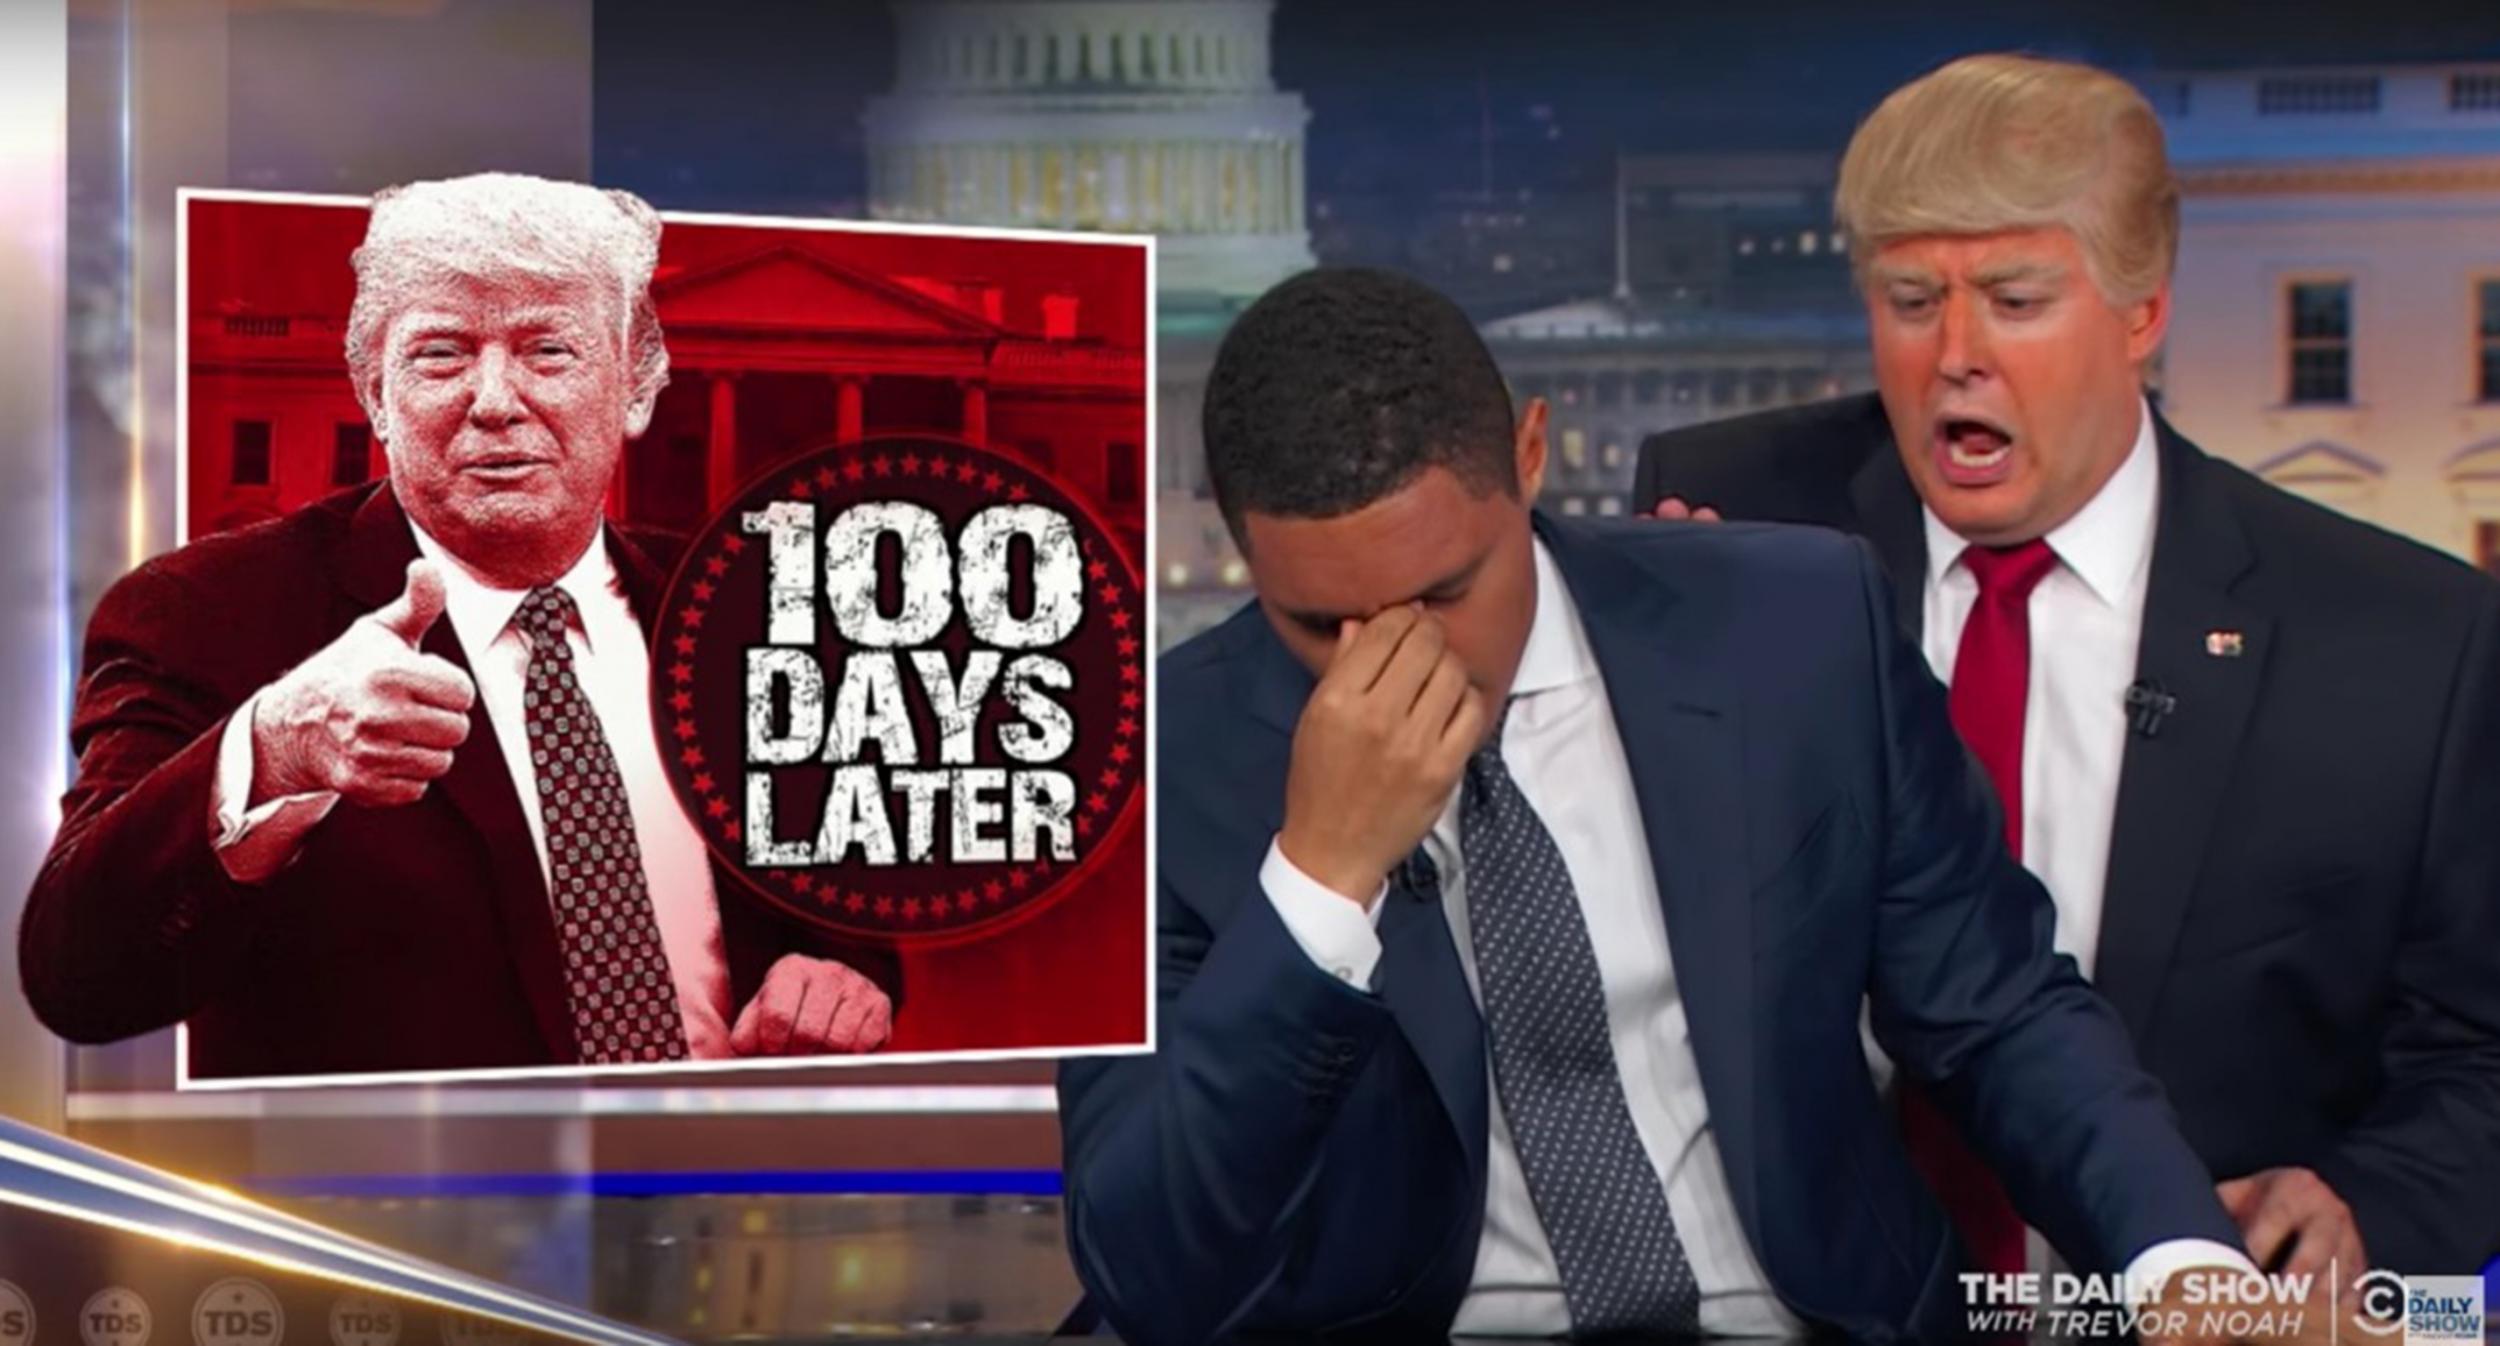 Trevor Noah presenting the Daily Show with Donald Trump impersonator